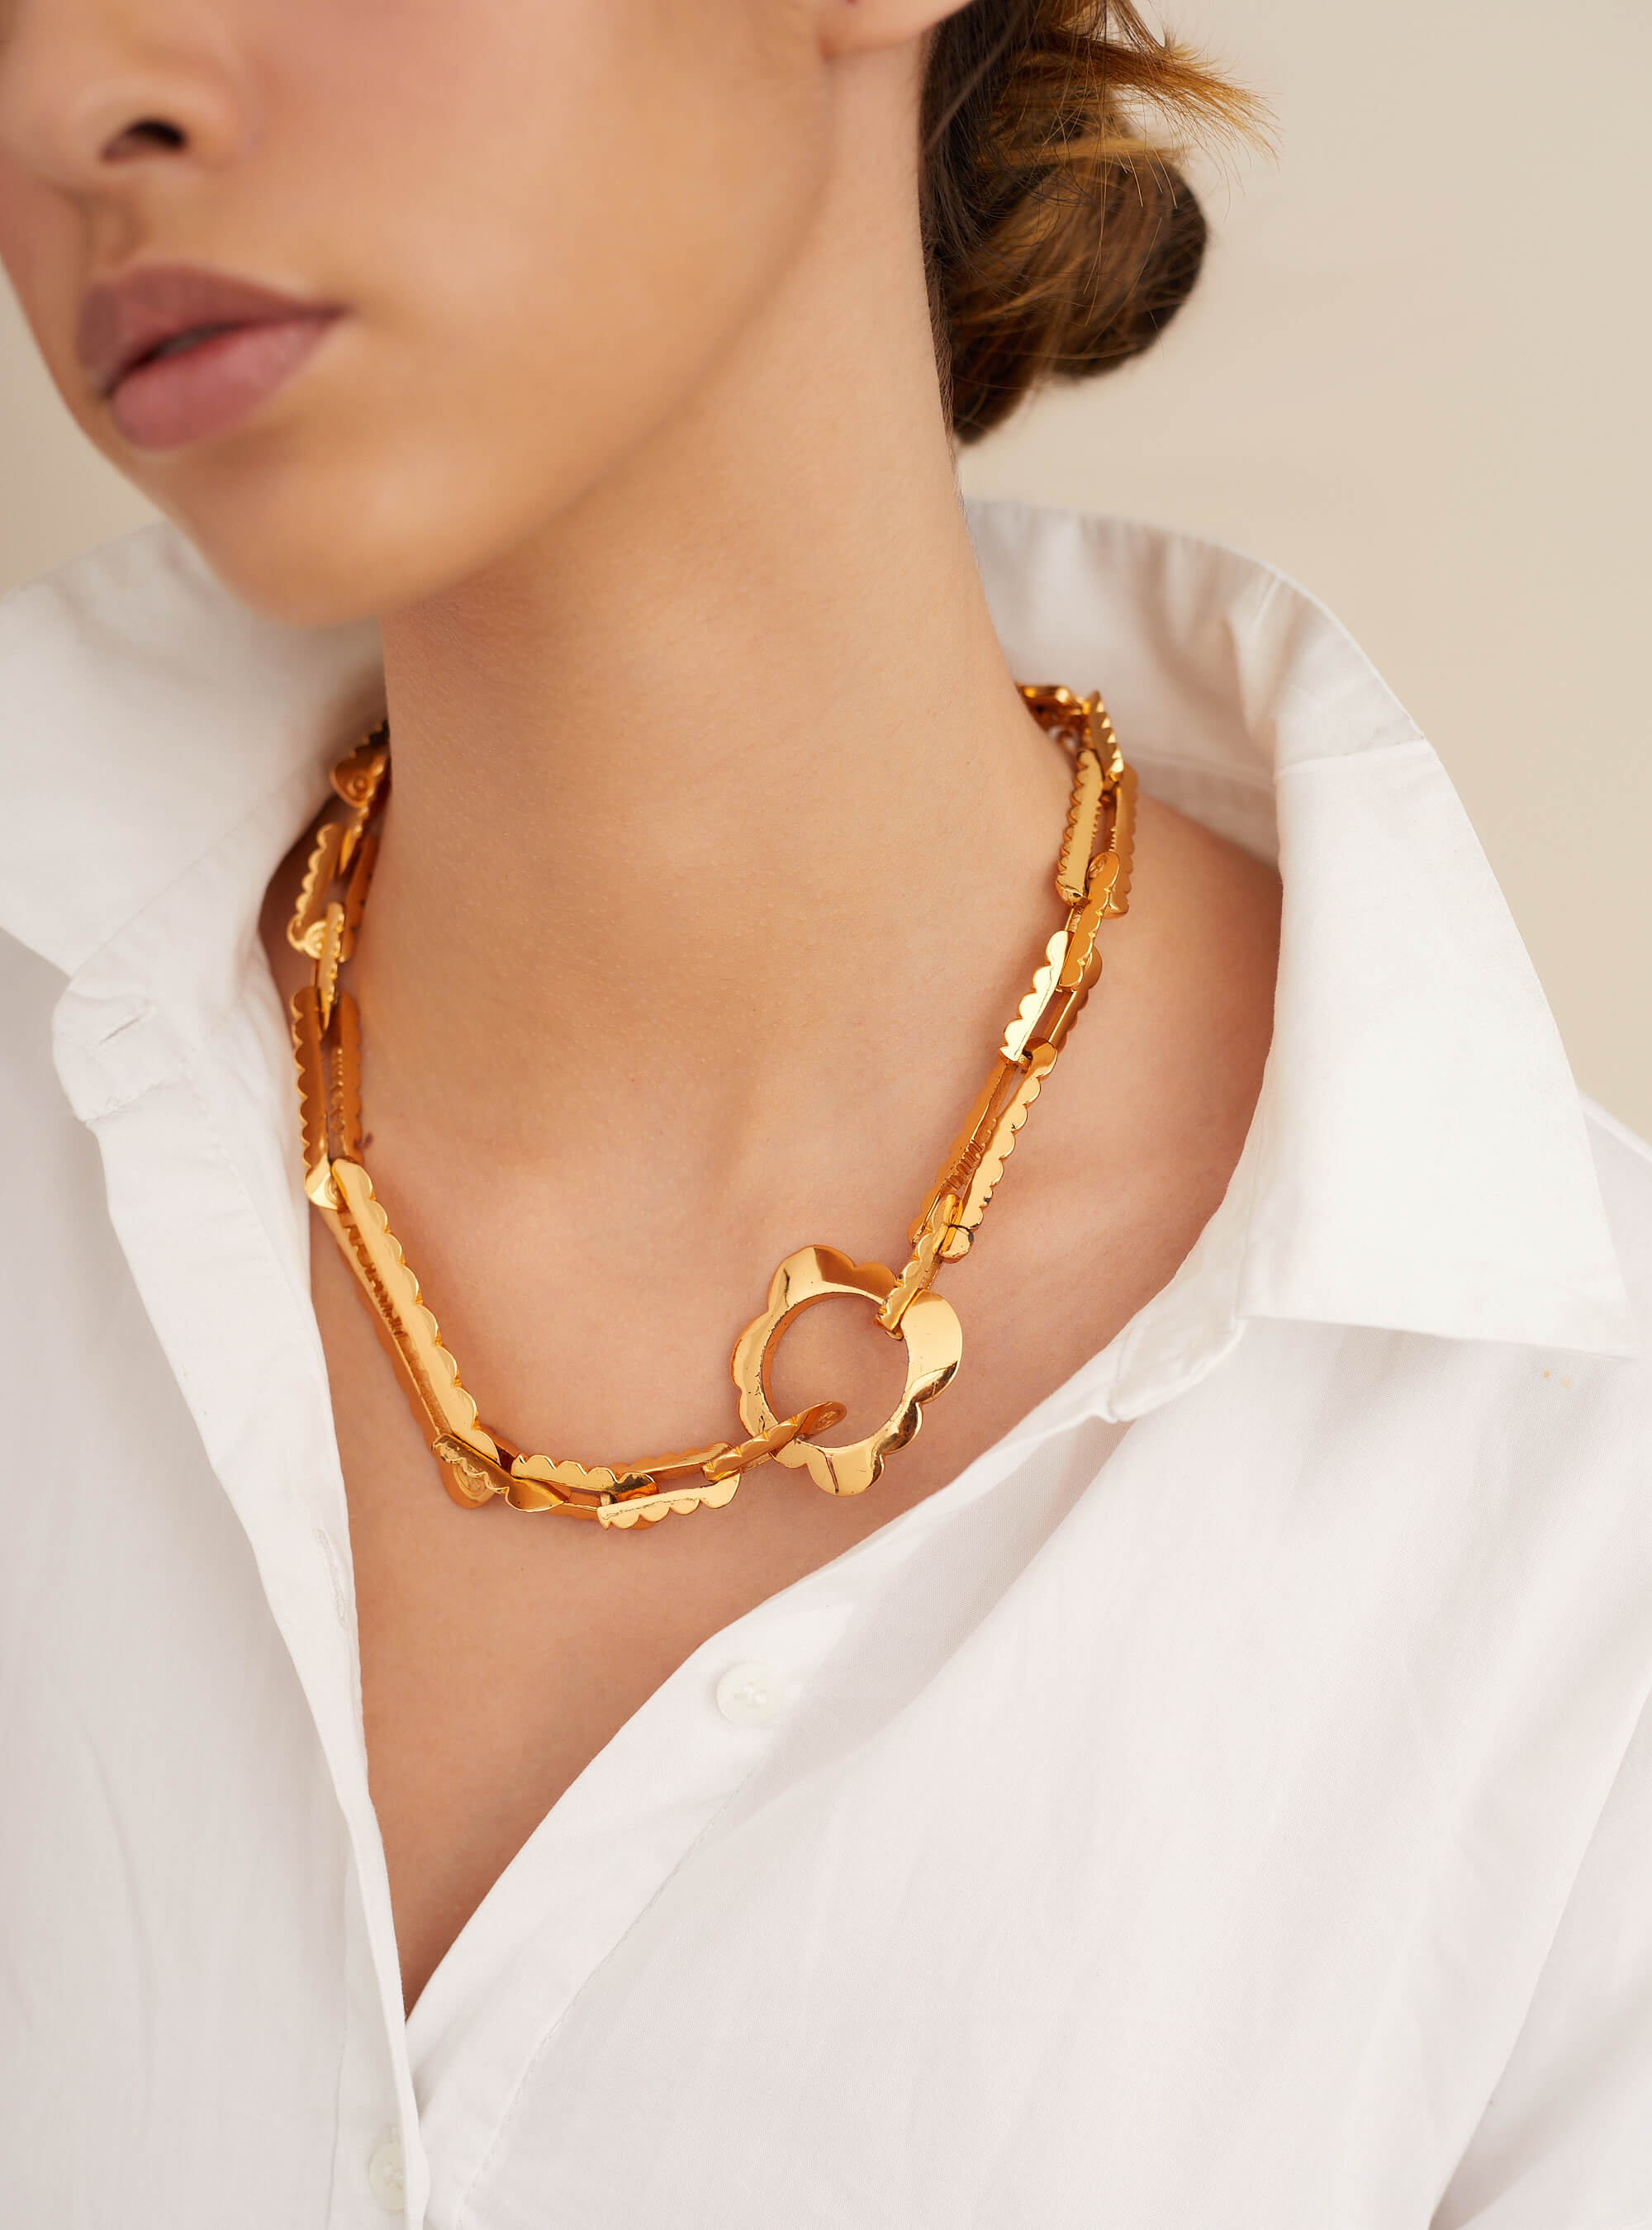 This Neckline. What Jewelry? - Ashley Donielle